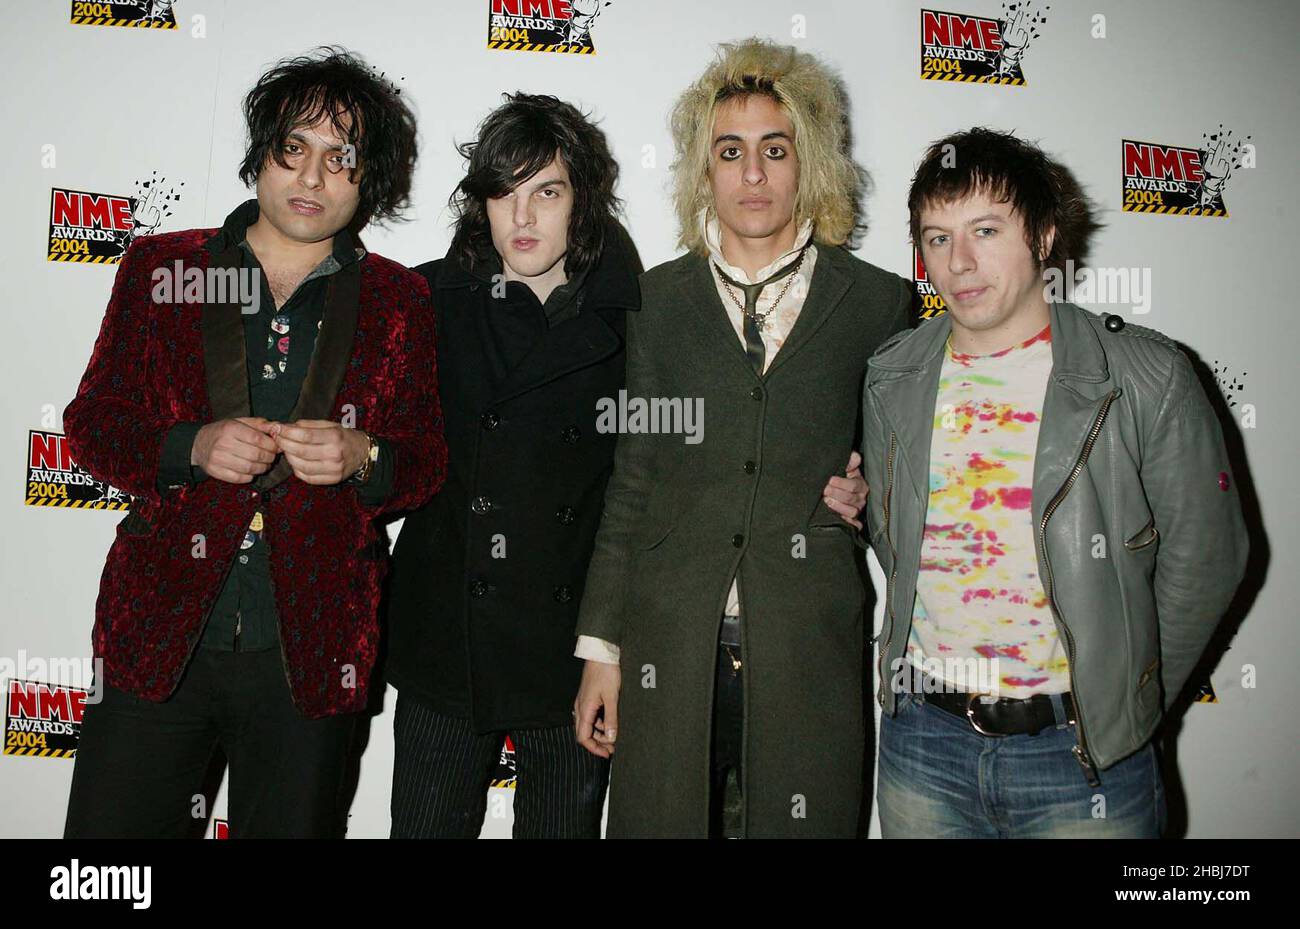 Eighties Matchbox Disaster arriveat the NME Awards at the Po Na Na in West London. Half Length. Stock Photo